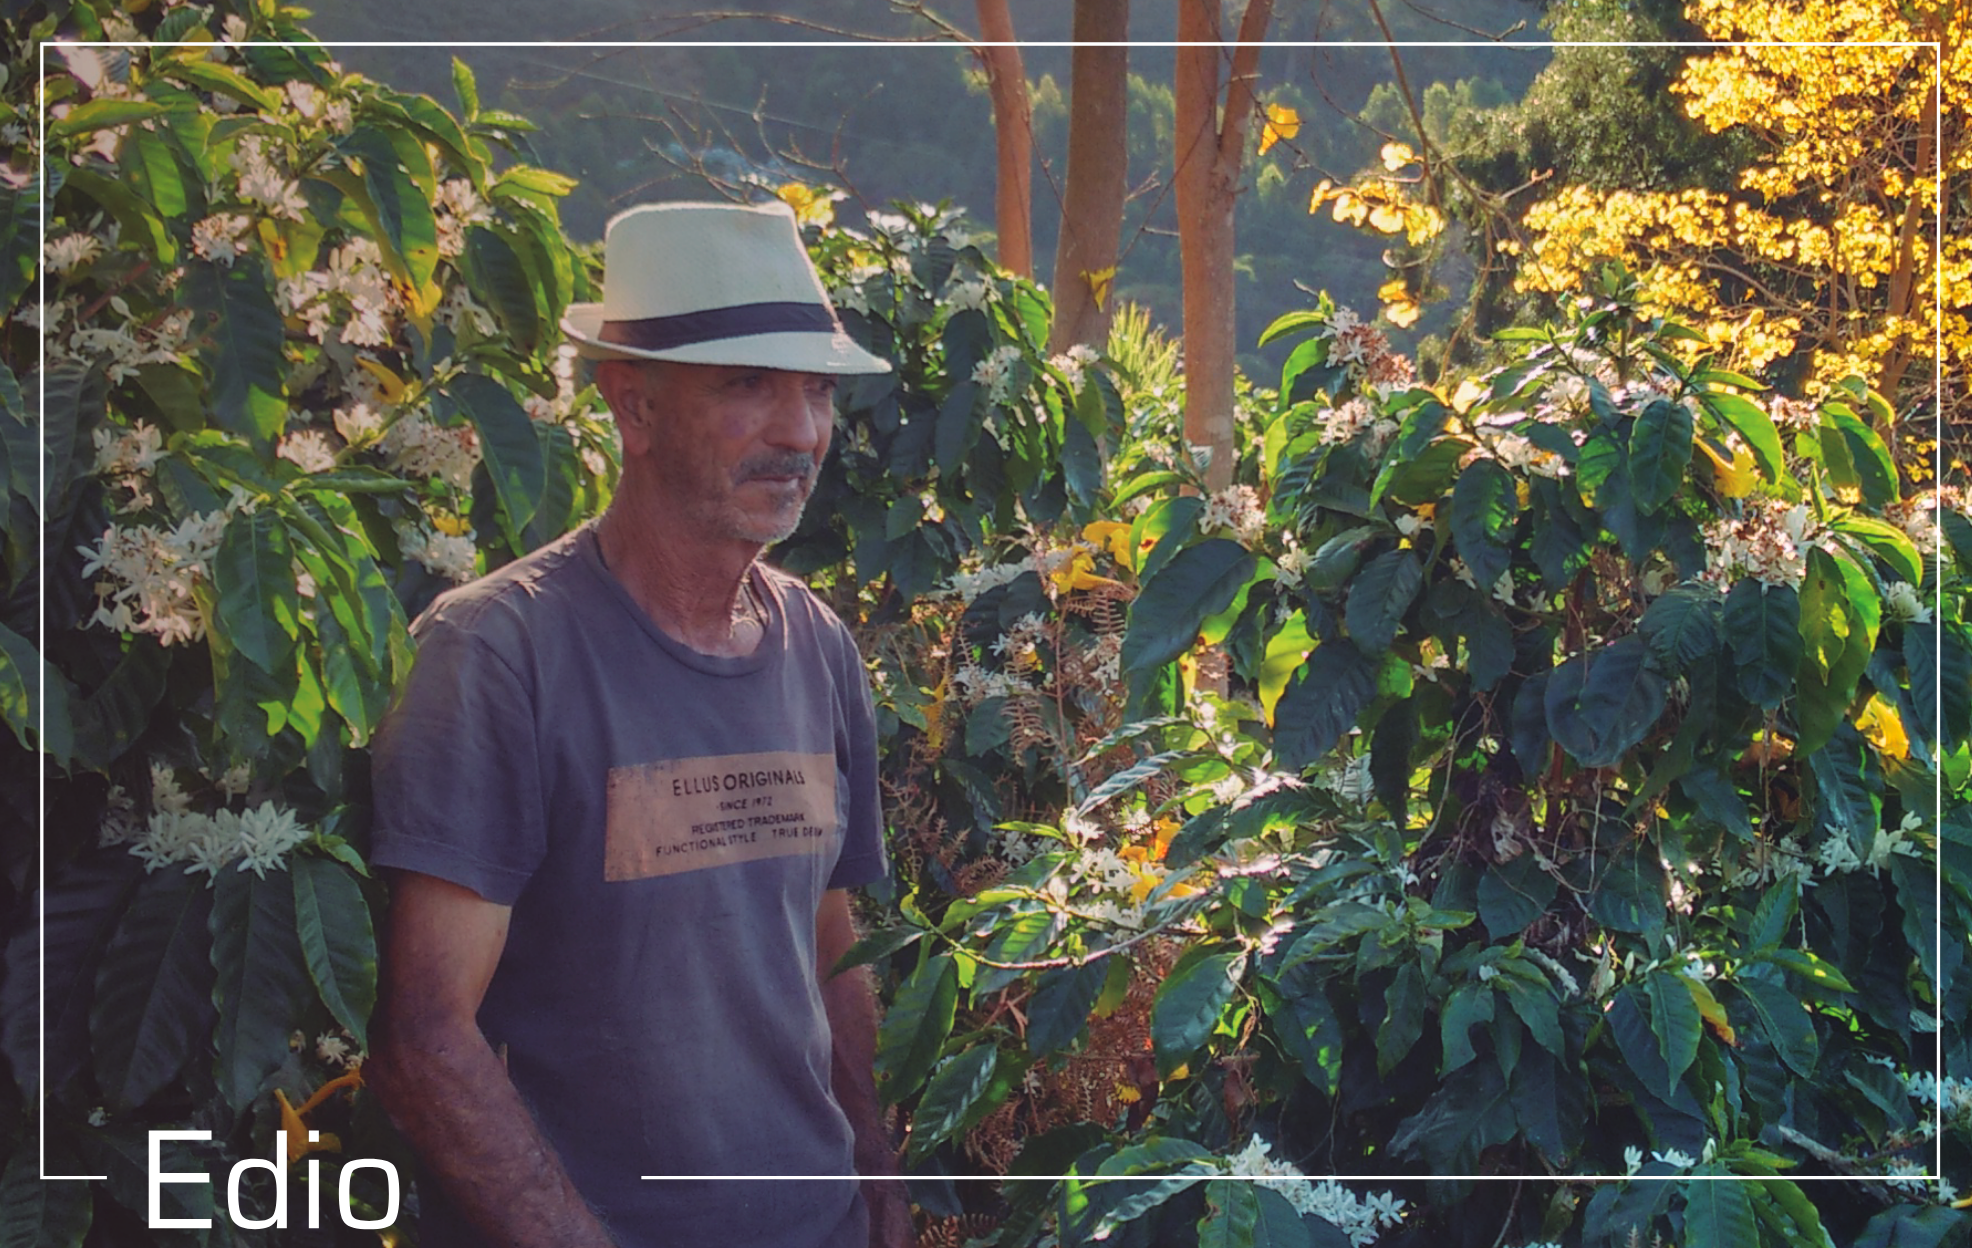 Meet Edio Miranda, one of our coffee growers based in the mountains of Araponga, Brazil.